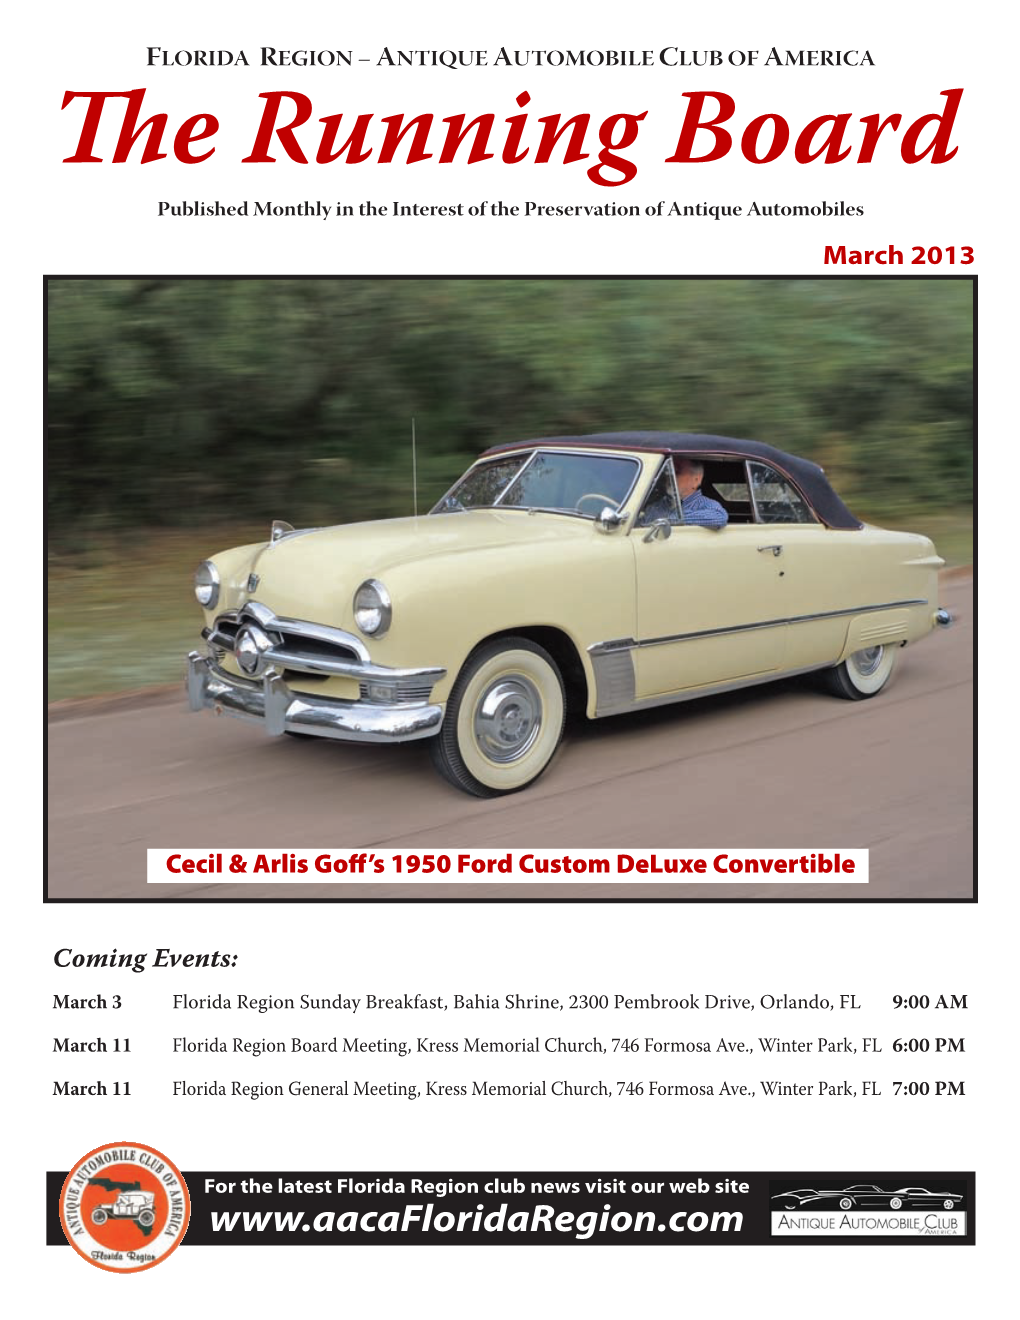 The Running Board Published Monthly in the Interest of the Preservation of Antique Automobiles March 2013